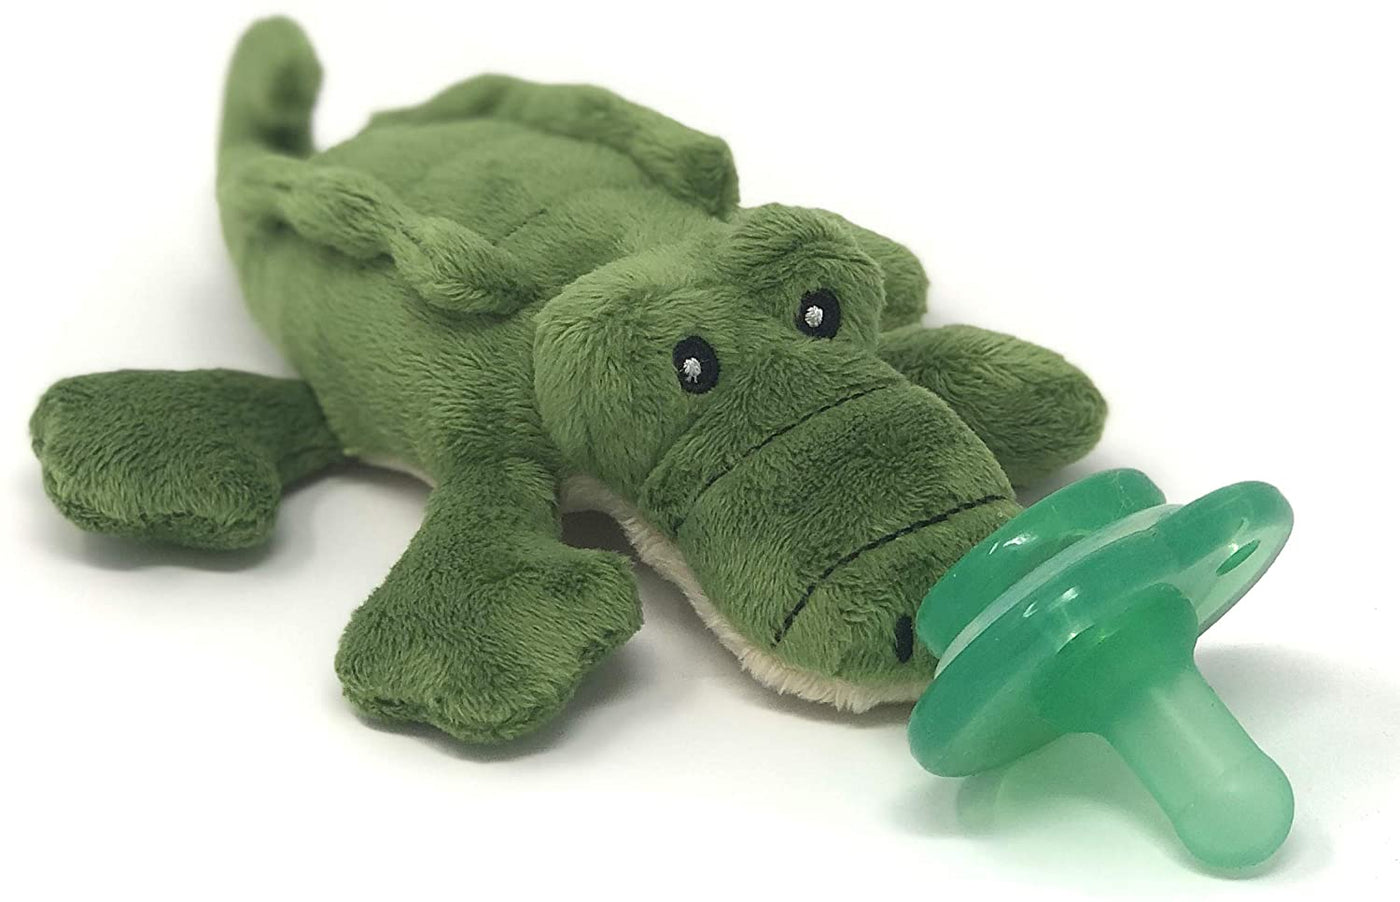 Nookums Paci-Plushies Buddies - Alligator Pacifier Holder - Plush Toy Includes Detachable Pacifier - Little Kooma